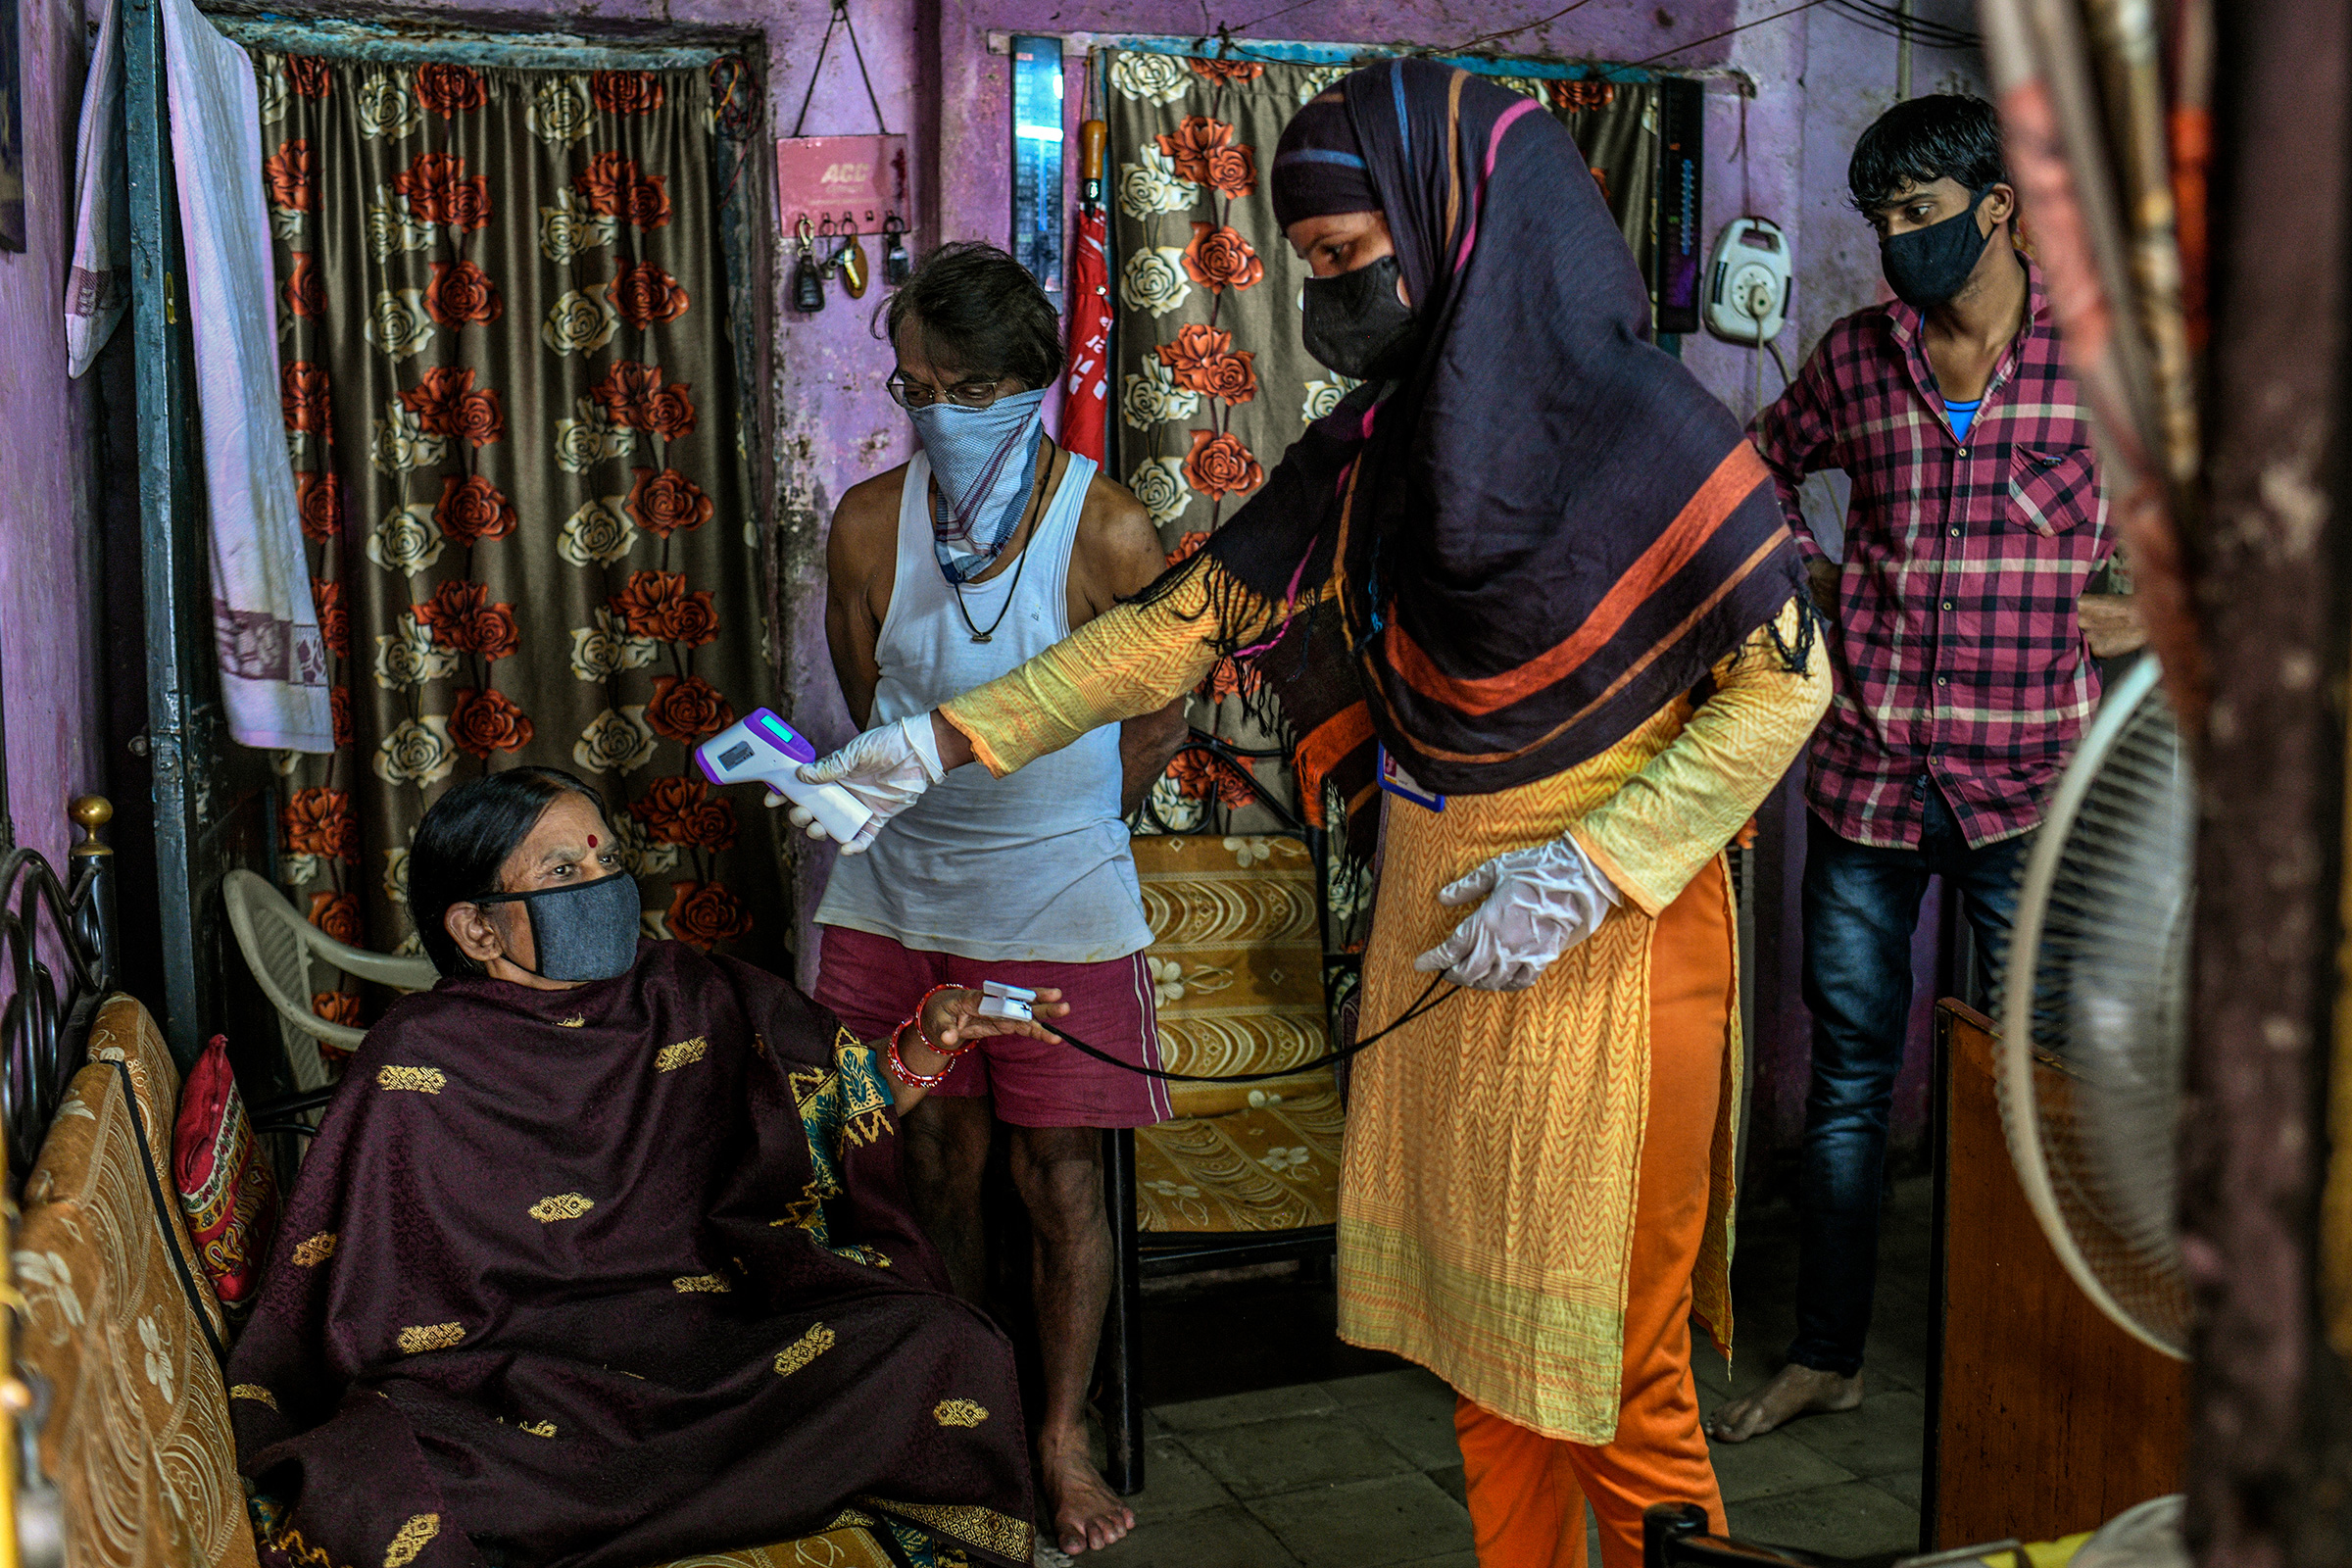 A health care worker checks a woman's temperature and oxygen saturation in the Dhole Patil slum of Pune, India, on Aug. 10. (Atul Loke for TIME)